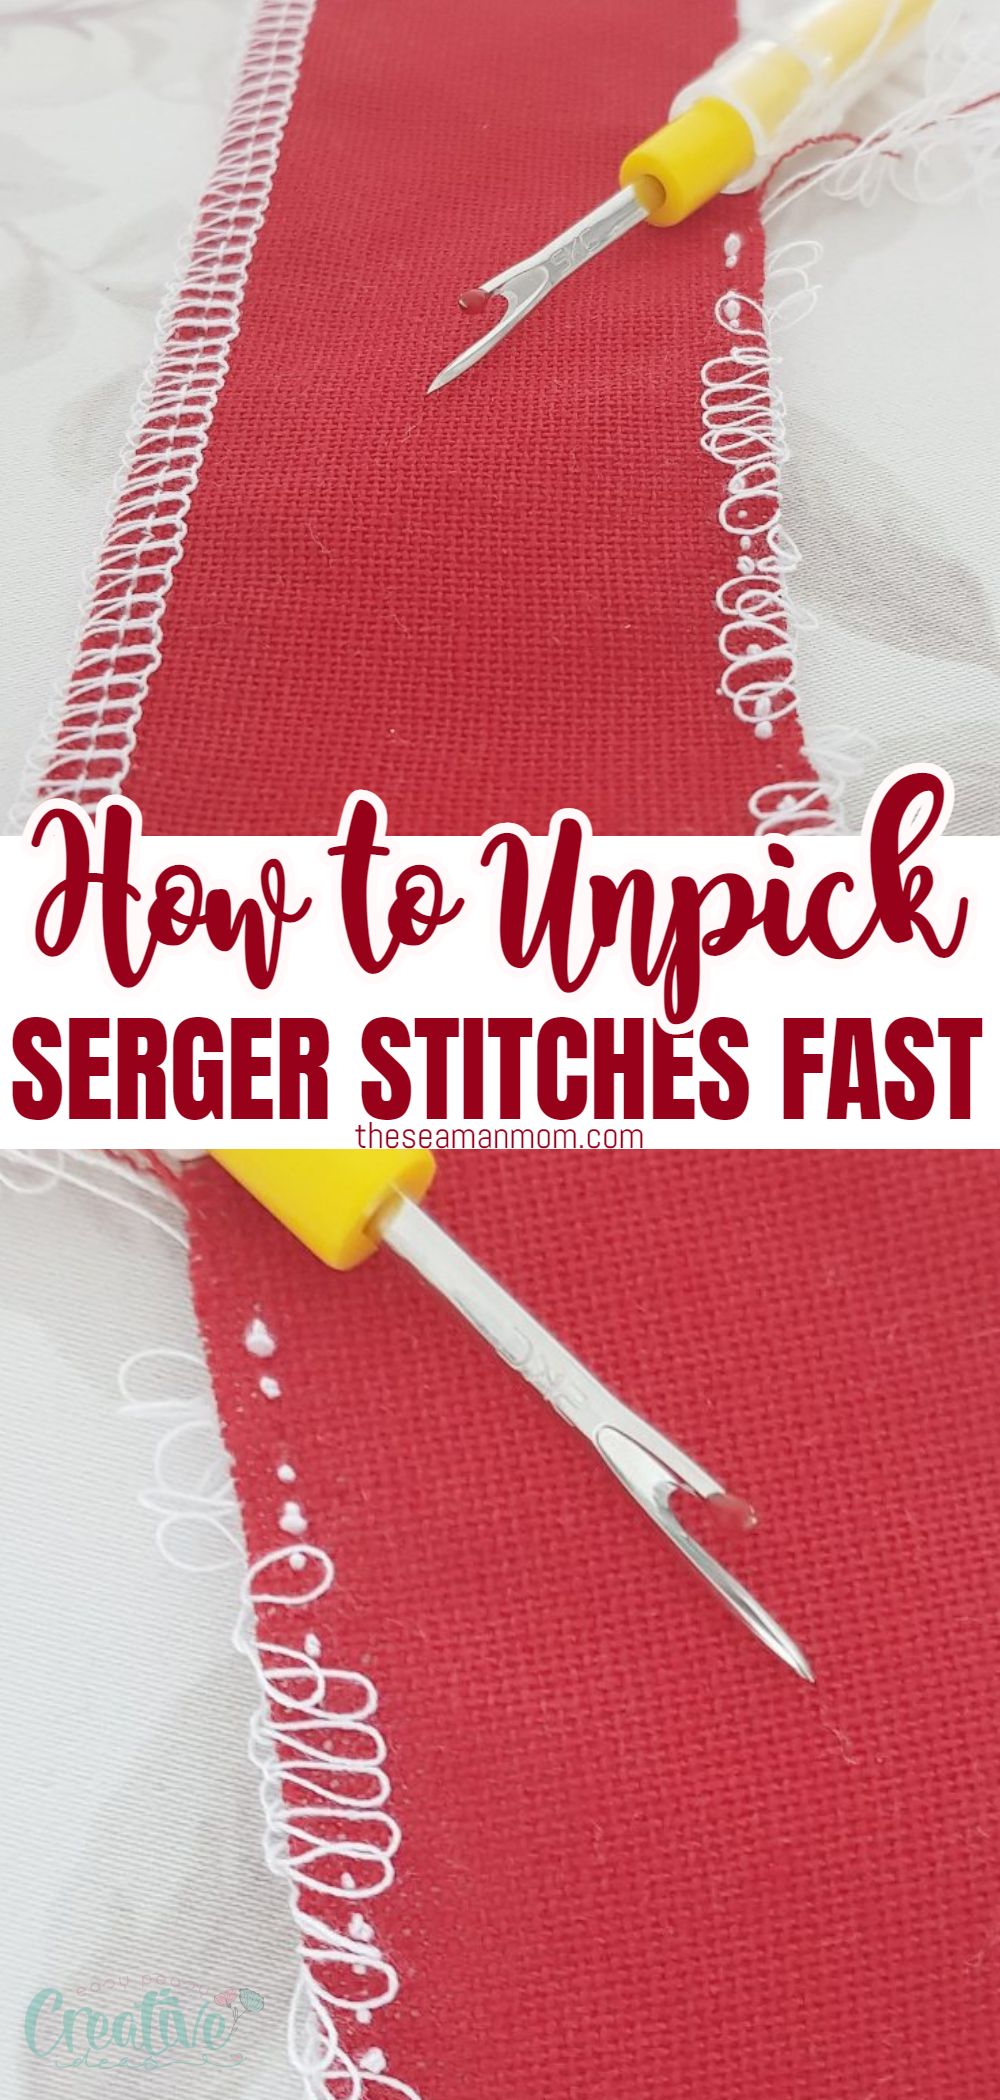 Did you know that removing serger stitches is just as easy as ripping out standard machine stitches? In this tutorial you'll learn how to remove serger stitches the fastest and easiest way! via @petroneagu